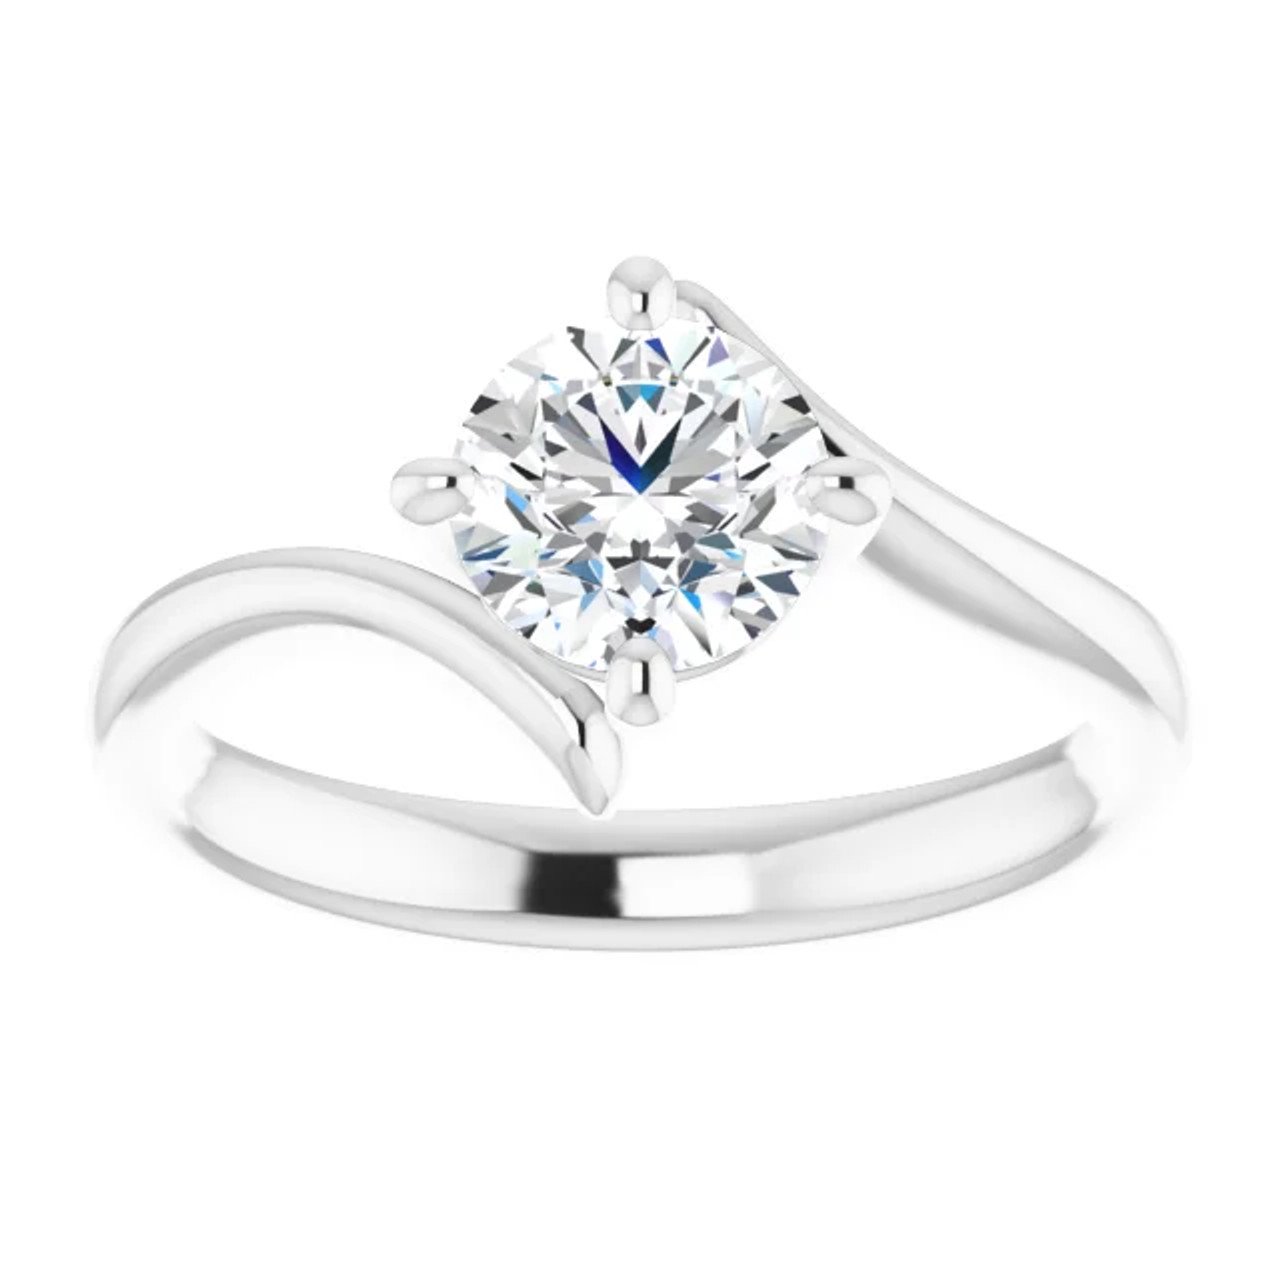 Tiffany Bypass Solitaire Engagement Ring Setting | Gage Diamonds